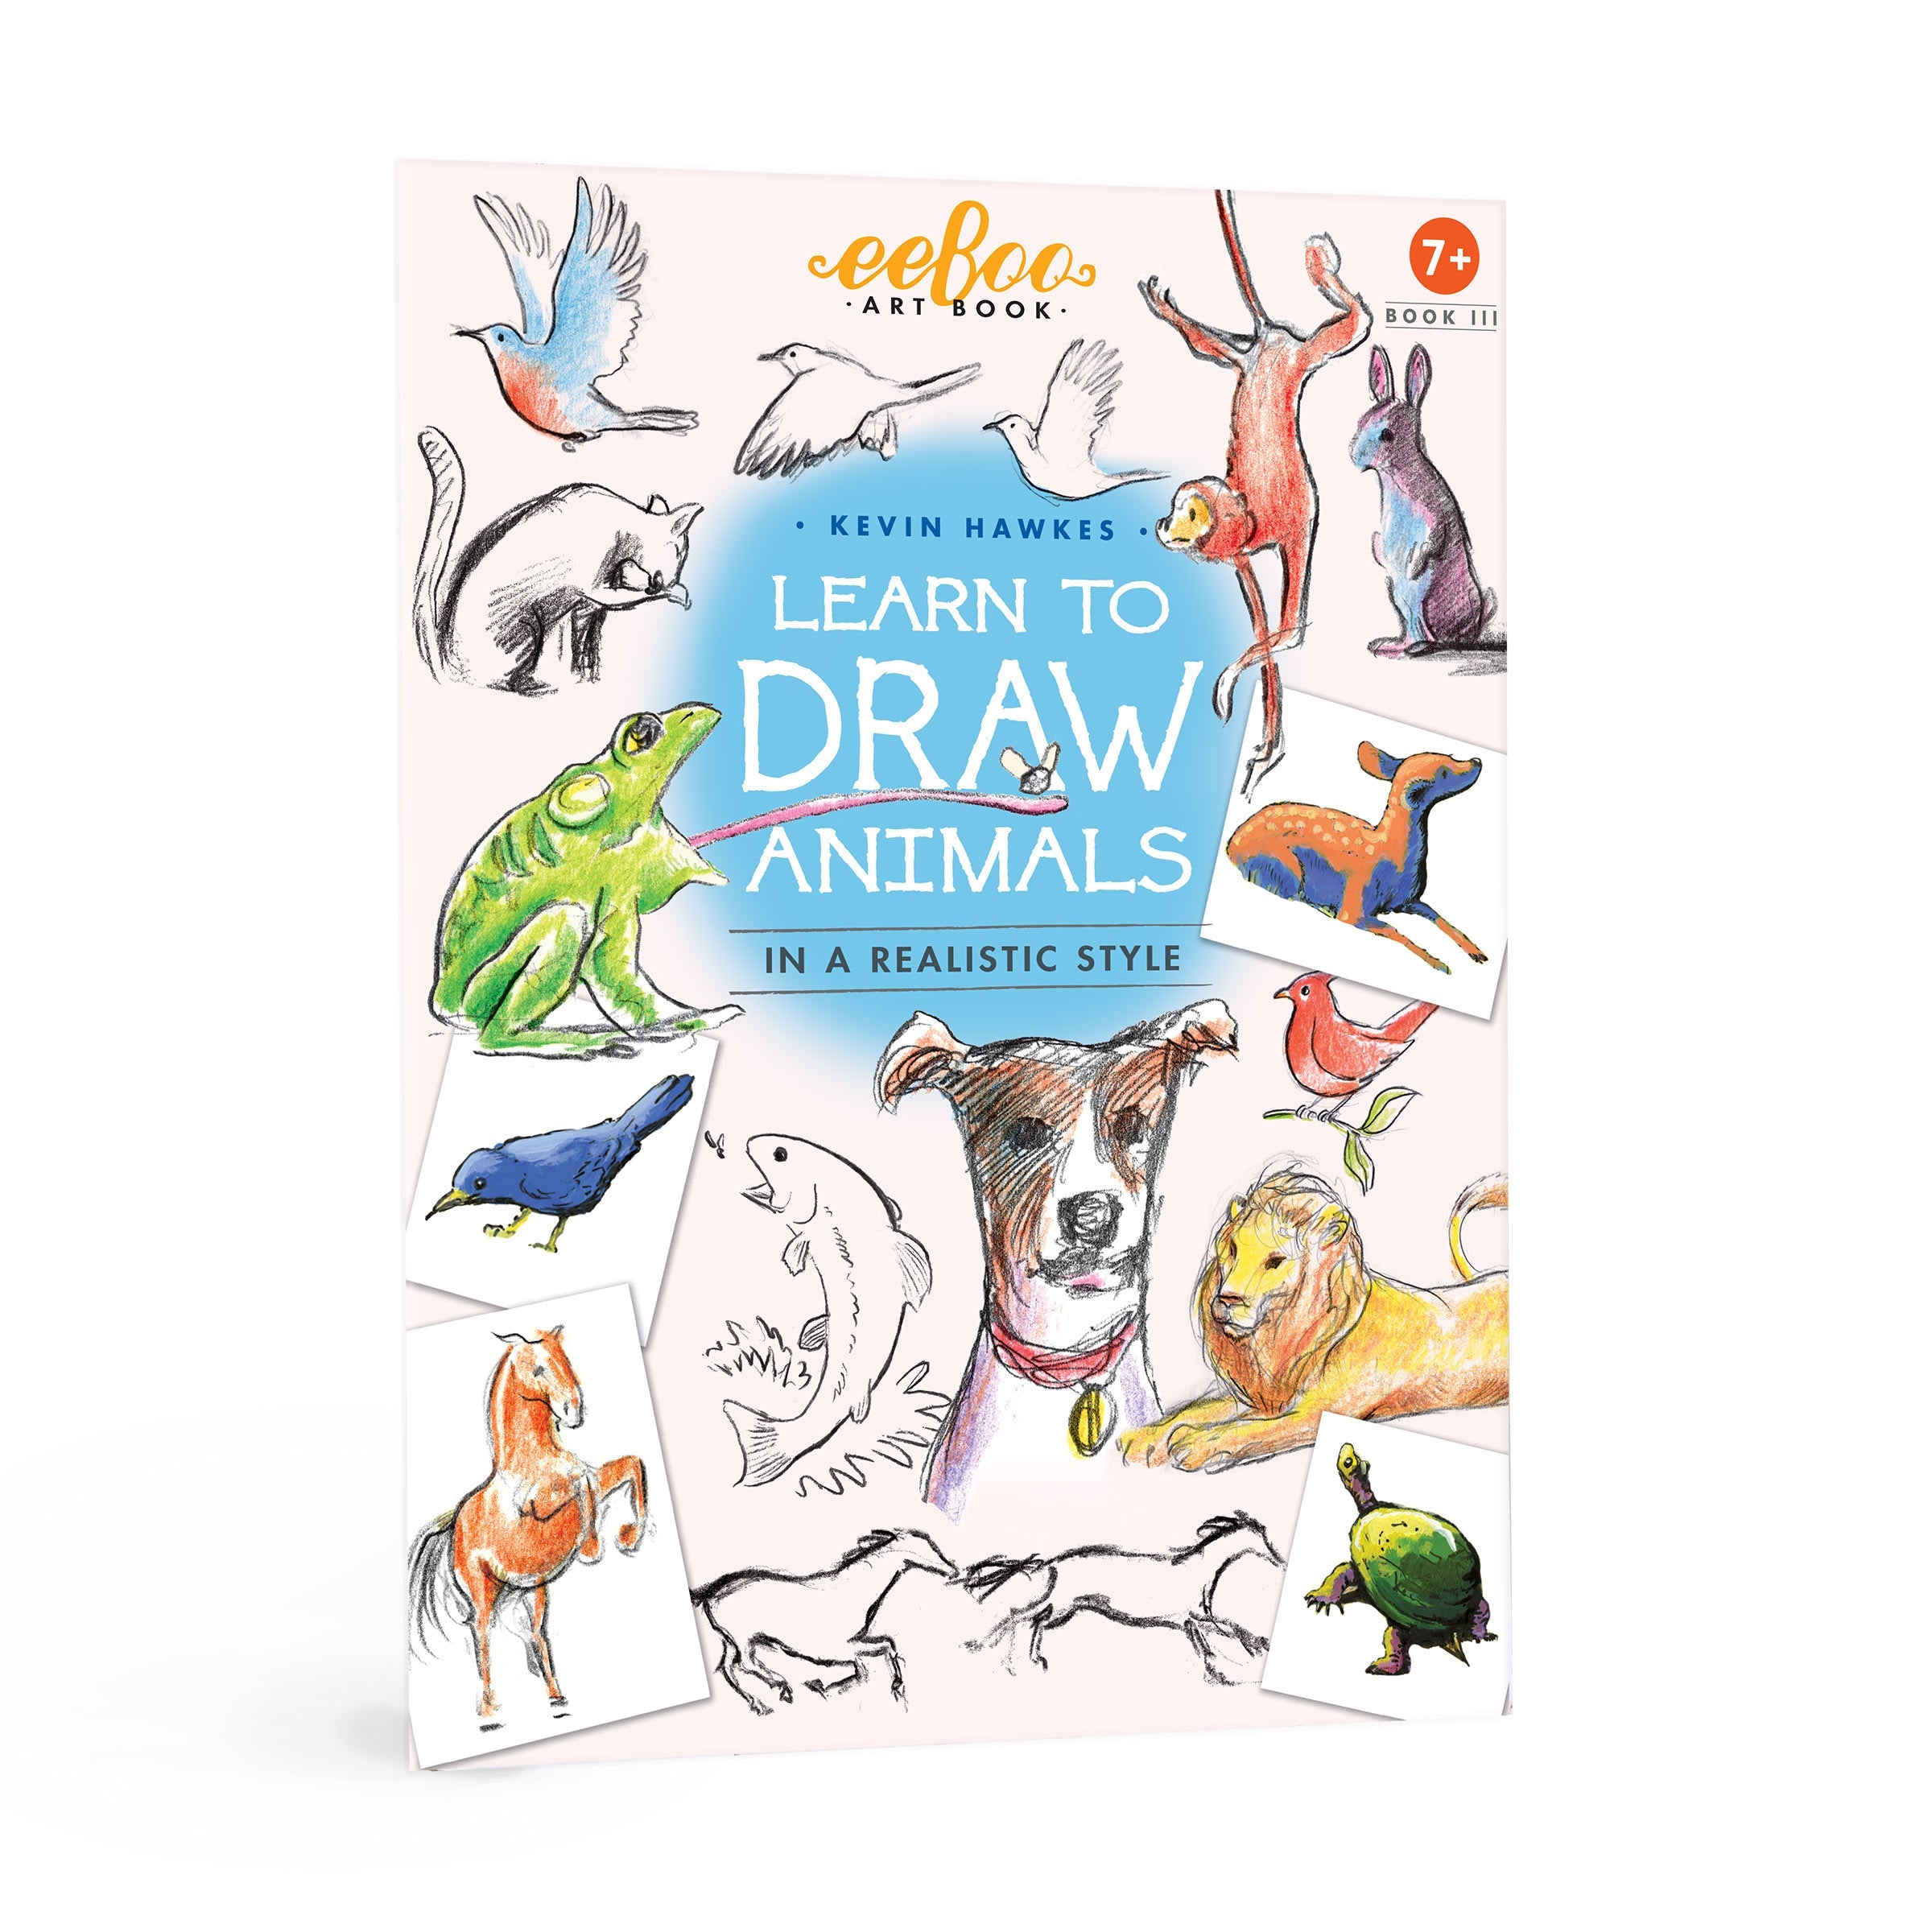 Learn to Draw Animals